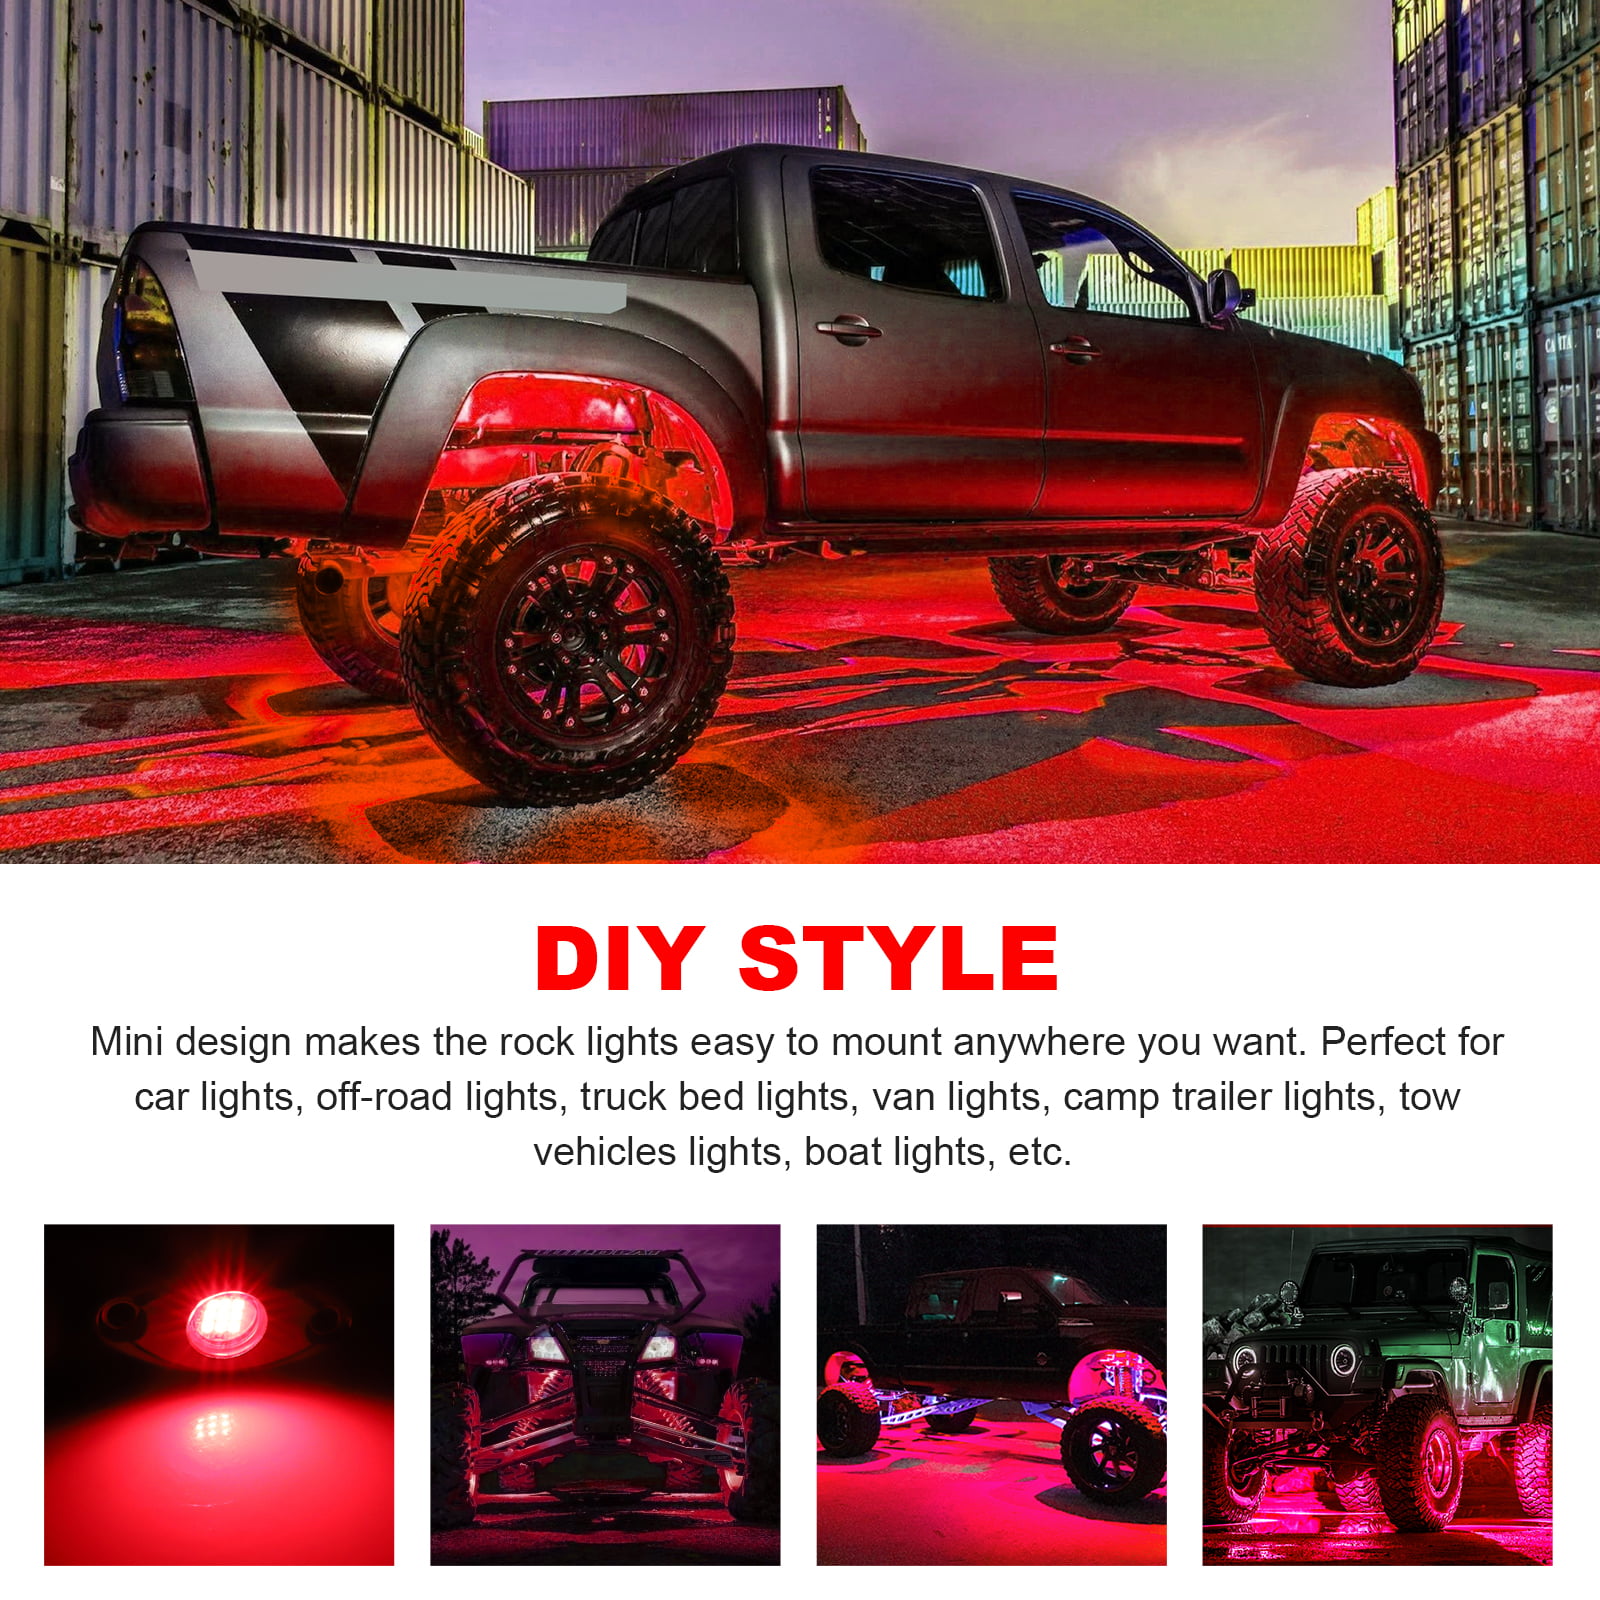 LEDMIRCY LED Rock Lights Red Kit for JEEP Off Road Truck ATV SUV Car Auto Boat High Power Underbody Glow Neon Trail Rig Lights Underglow Lights Waterproof Shockproof Pack of 6,Red 